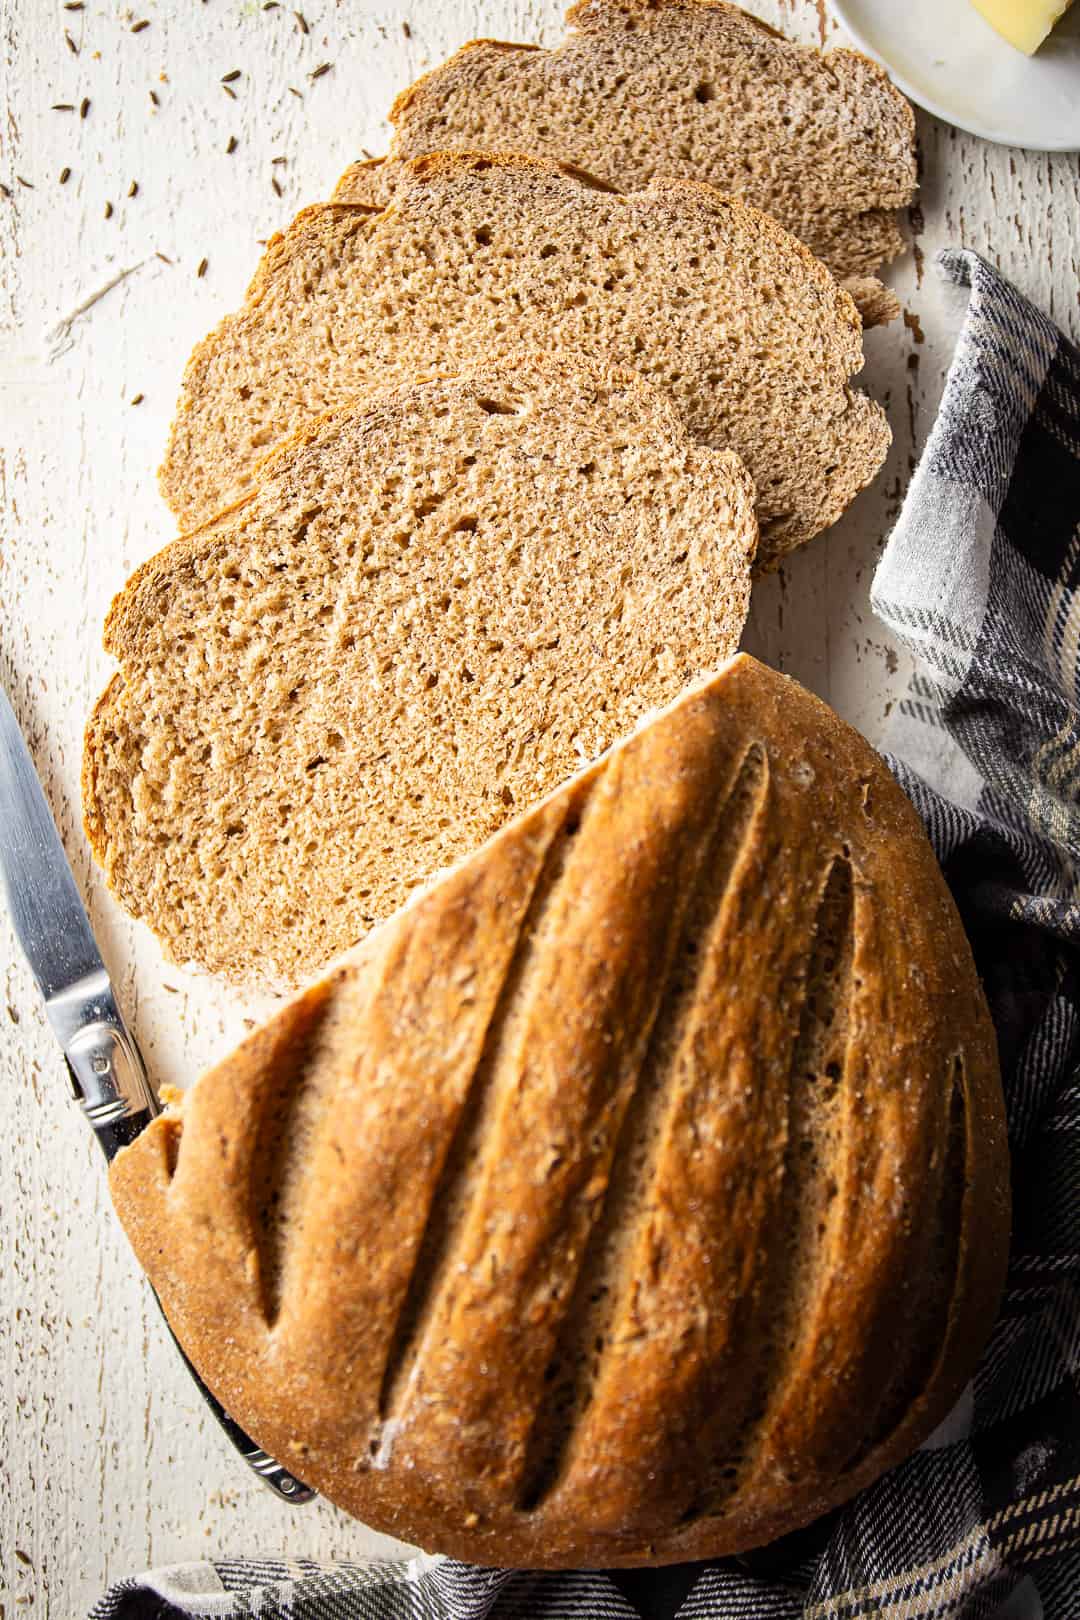 Bread with rye baked into a loaf and sliced for sandwiches or toast.